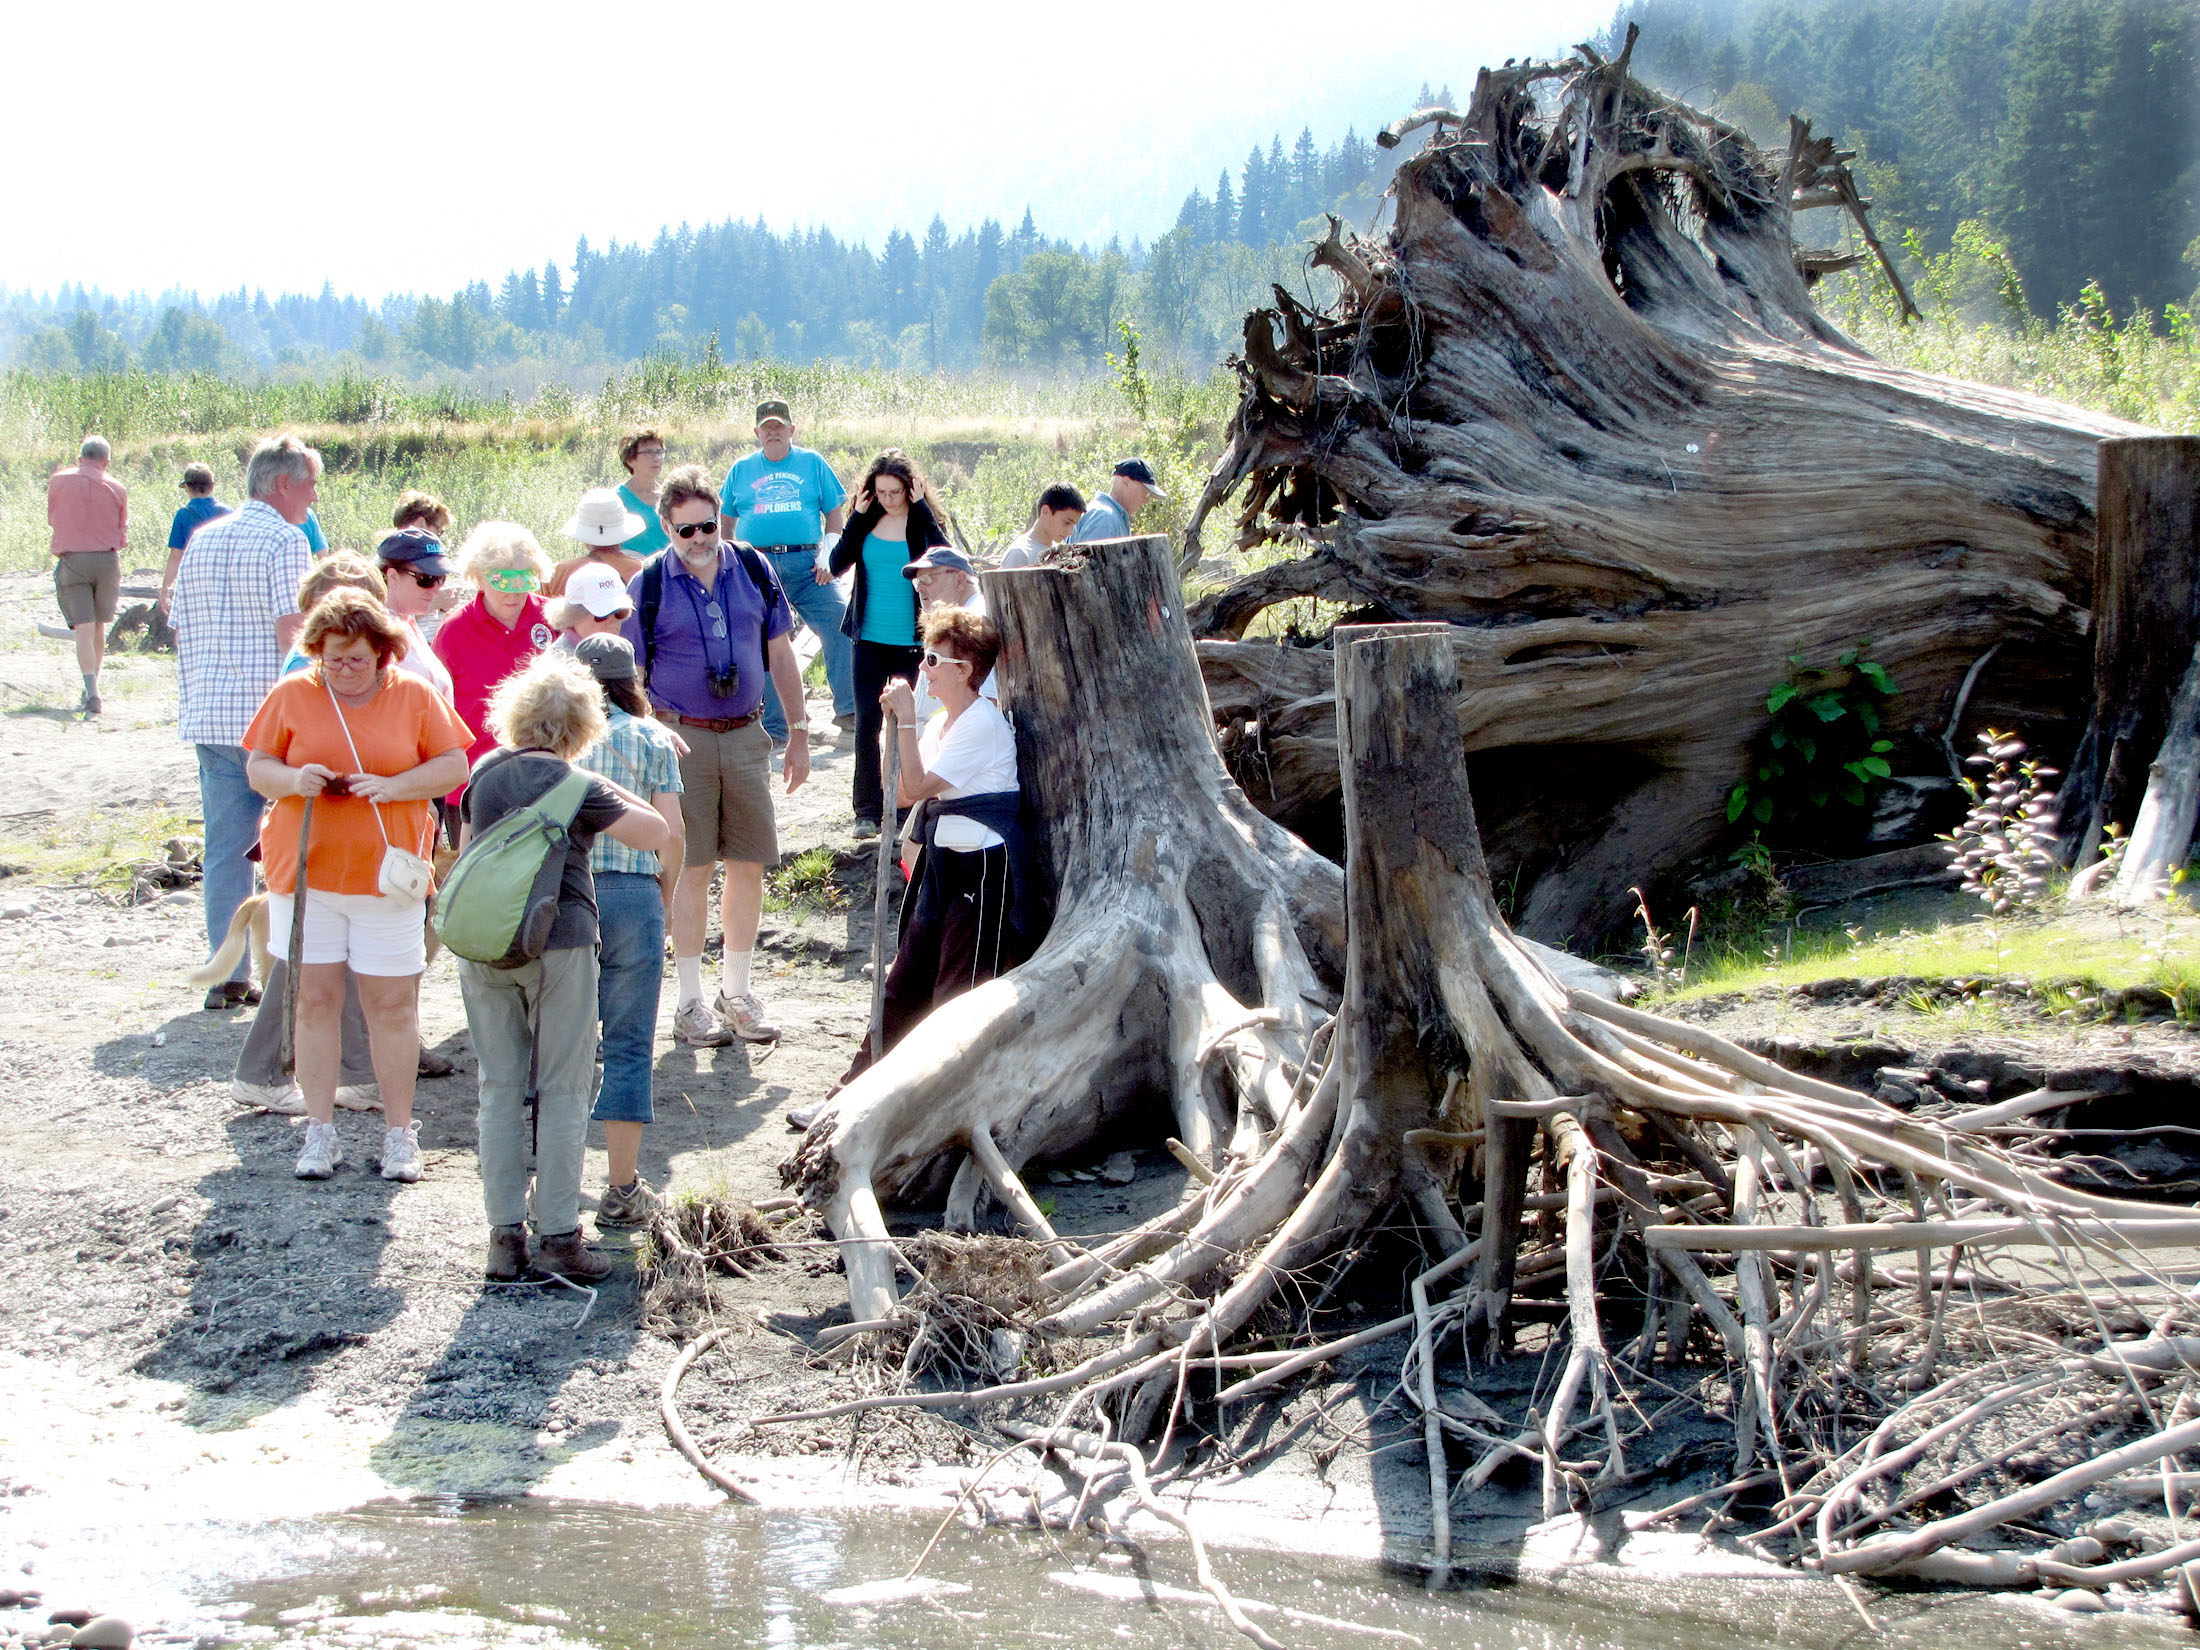 Participants in a Sunday ranger-guided hike of the former Lake Aldwell bed examine giant stumps left behind after the lakebed was logged around 1911